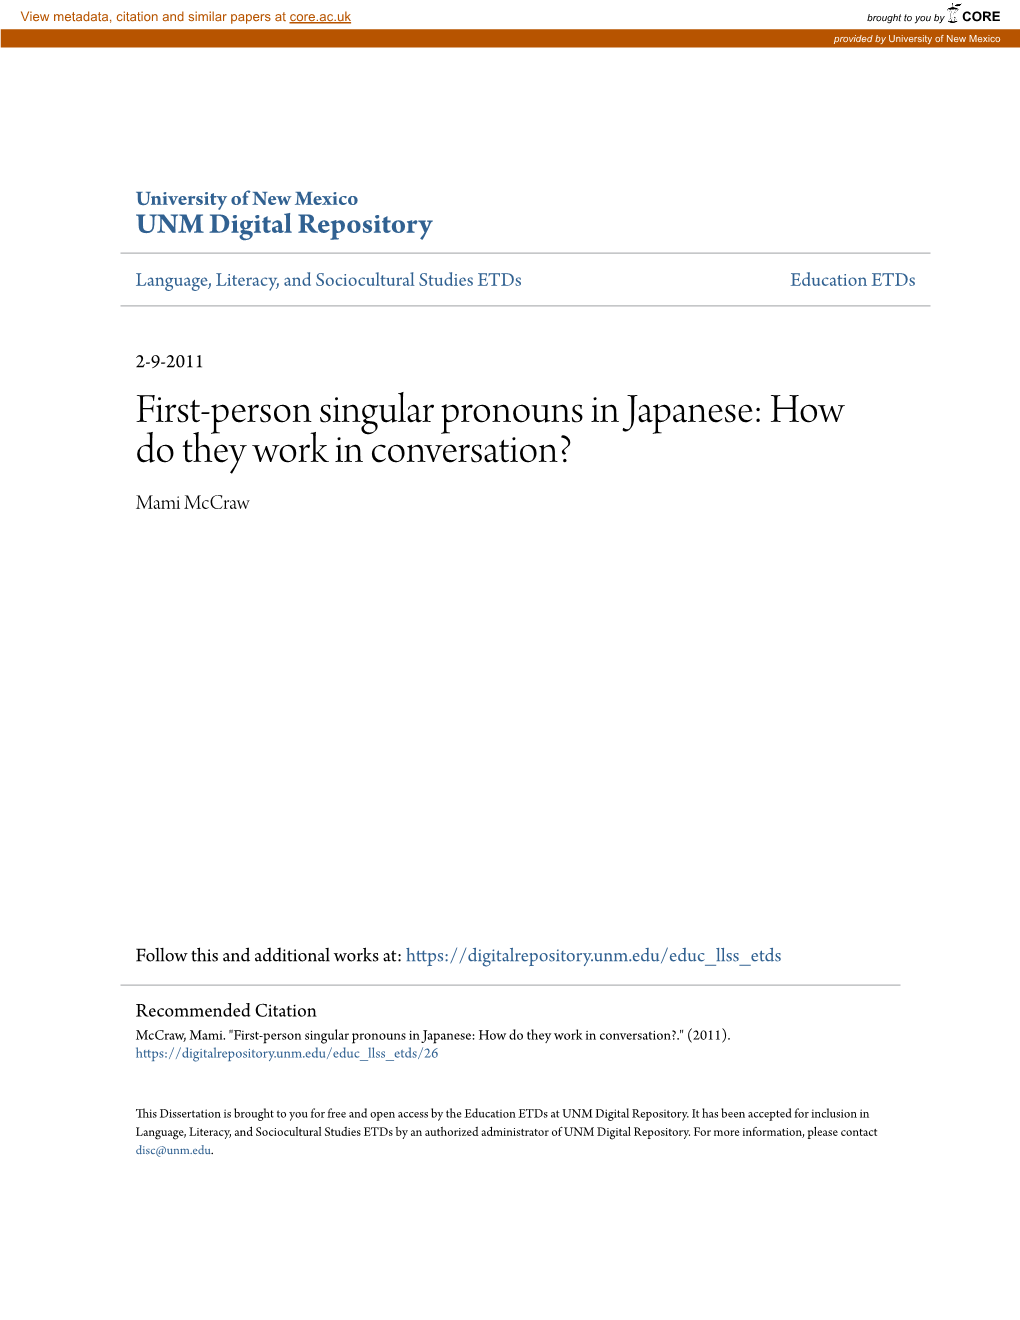 First-Person Singular Pronouns in Japanese: How Do They Work in Conversation? Mami Mccraw